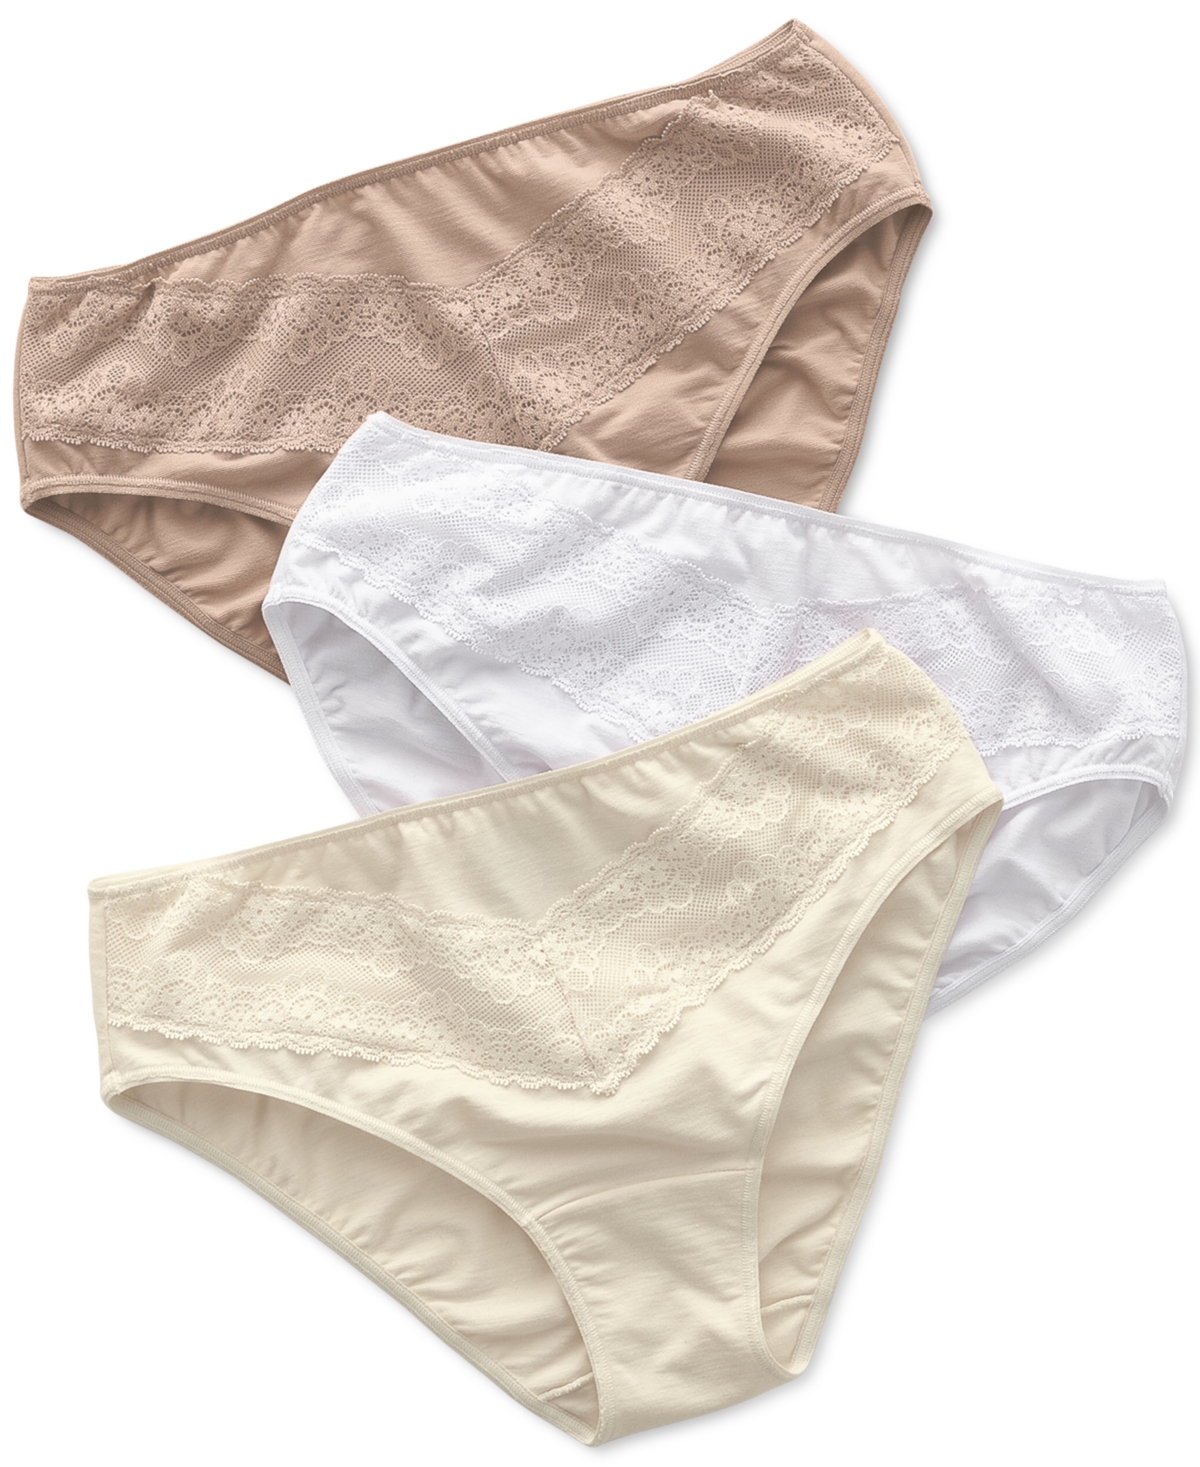 3 Brief Panties With Lace - Assorted